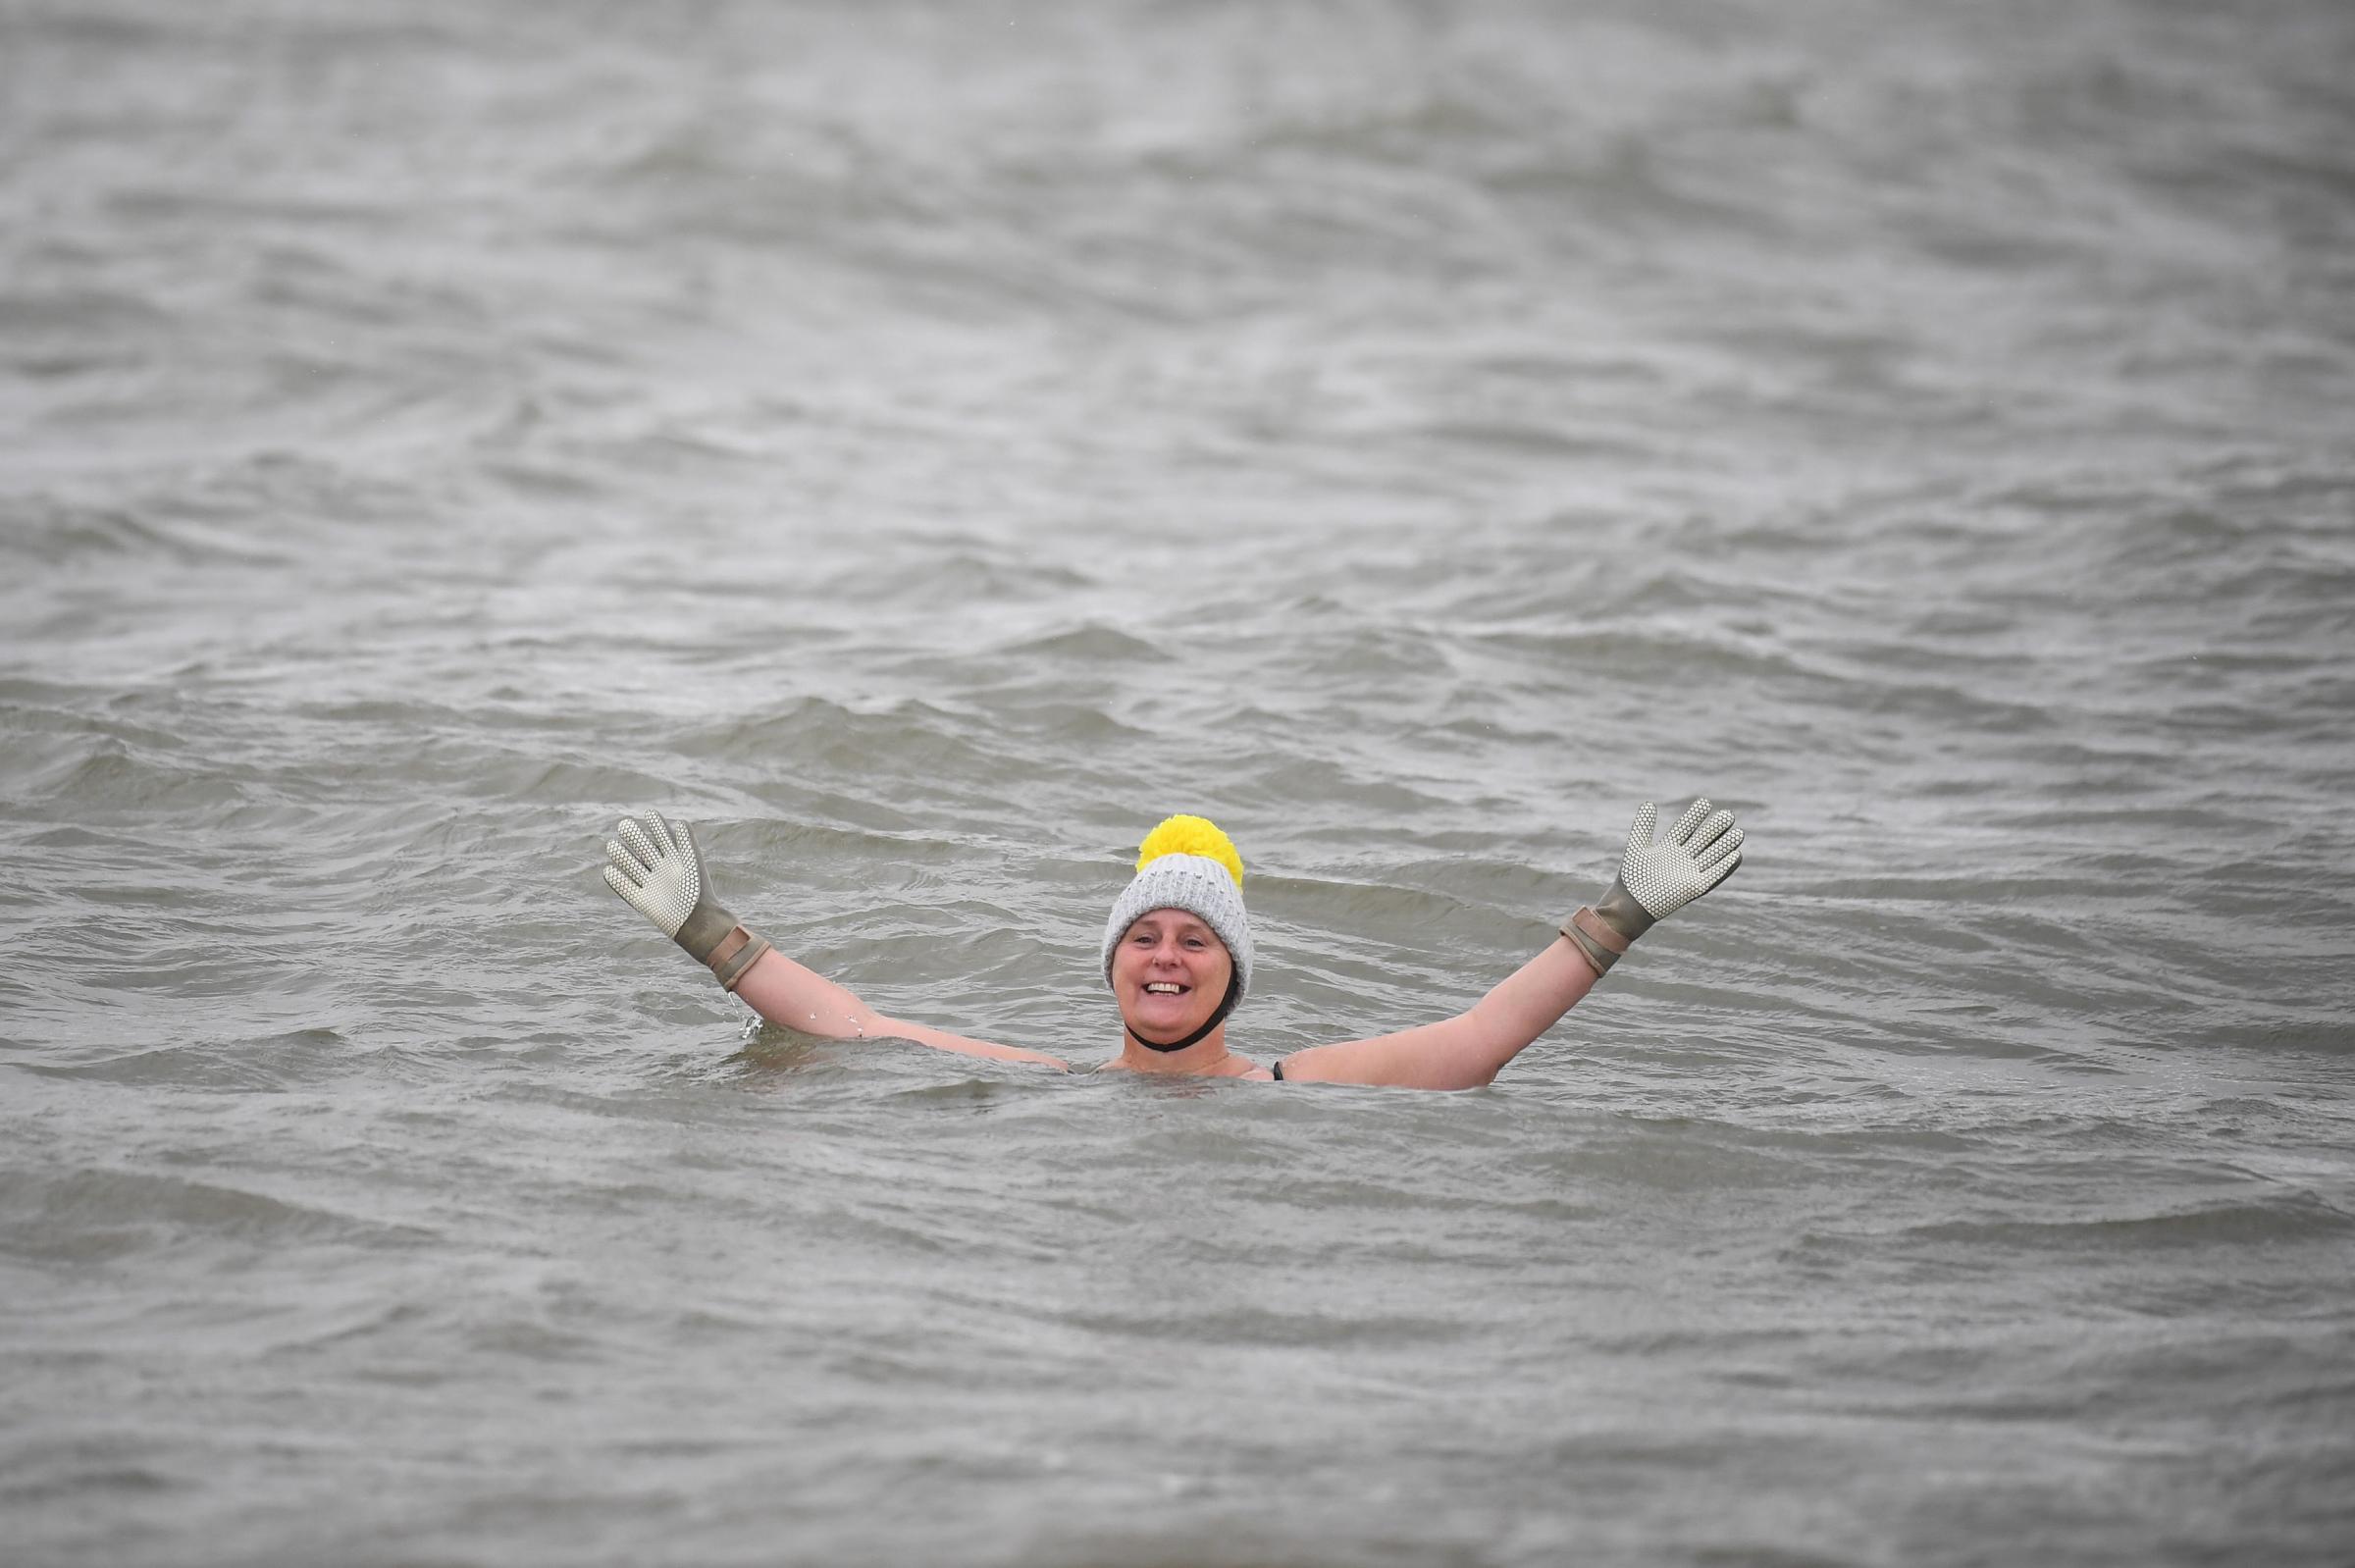 Swimmer Peta Hunter takes an early morning dip at Thorpe Bay. Picture: Victoria Jones/PA Wire 